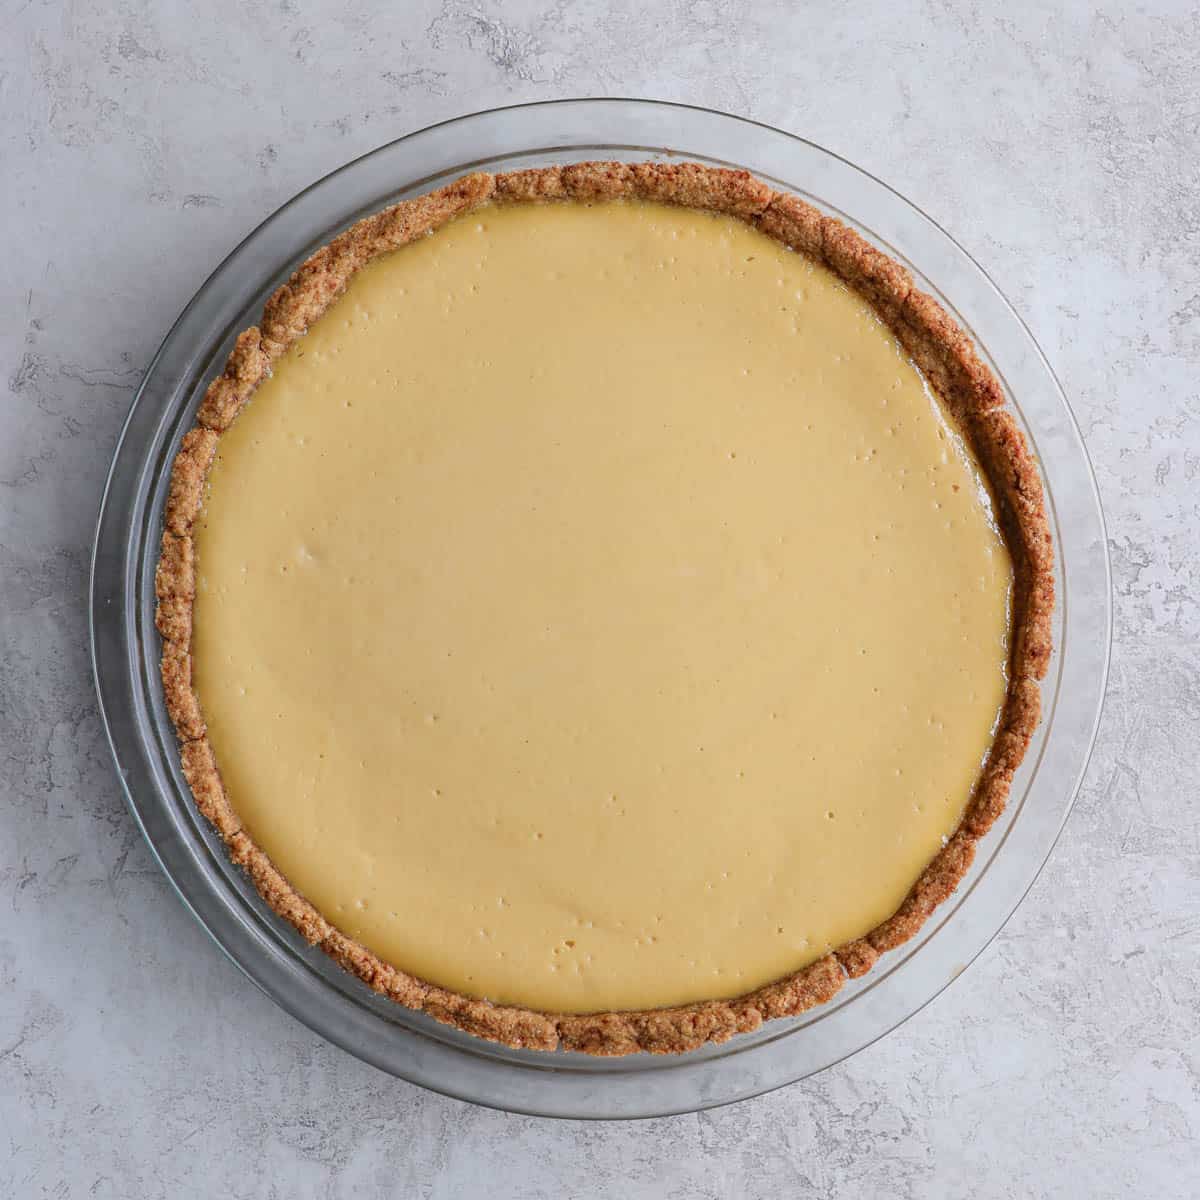 key lime pie after being baked